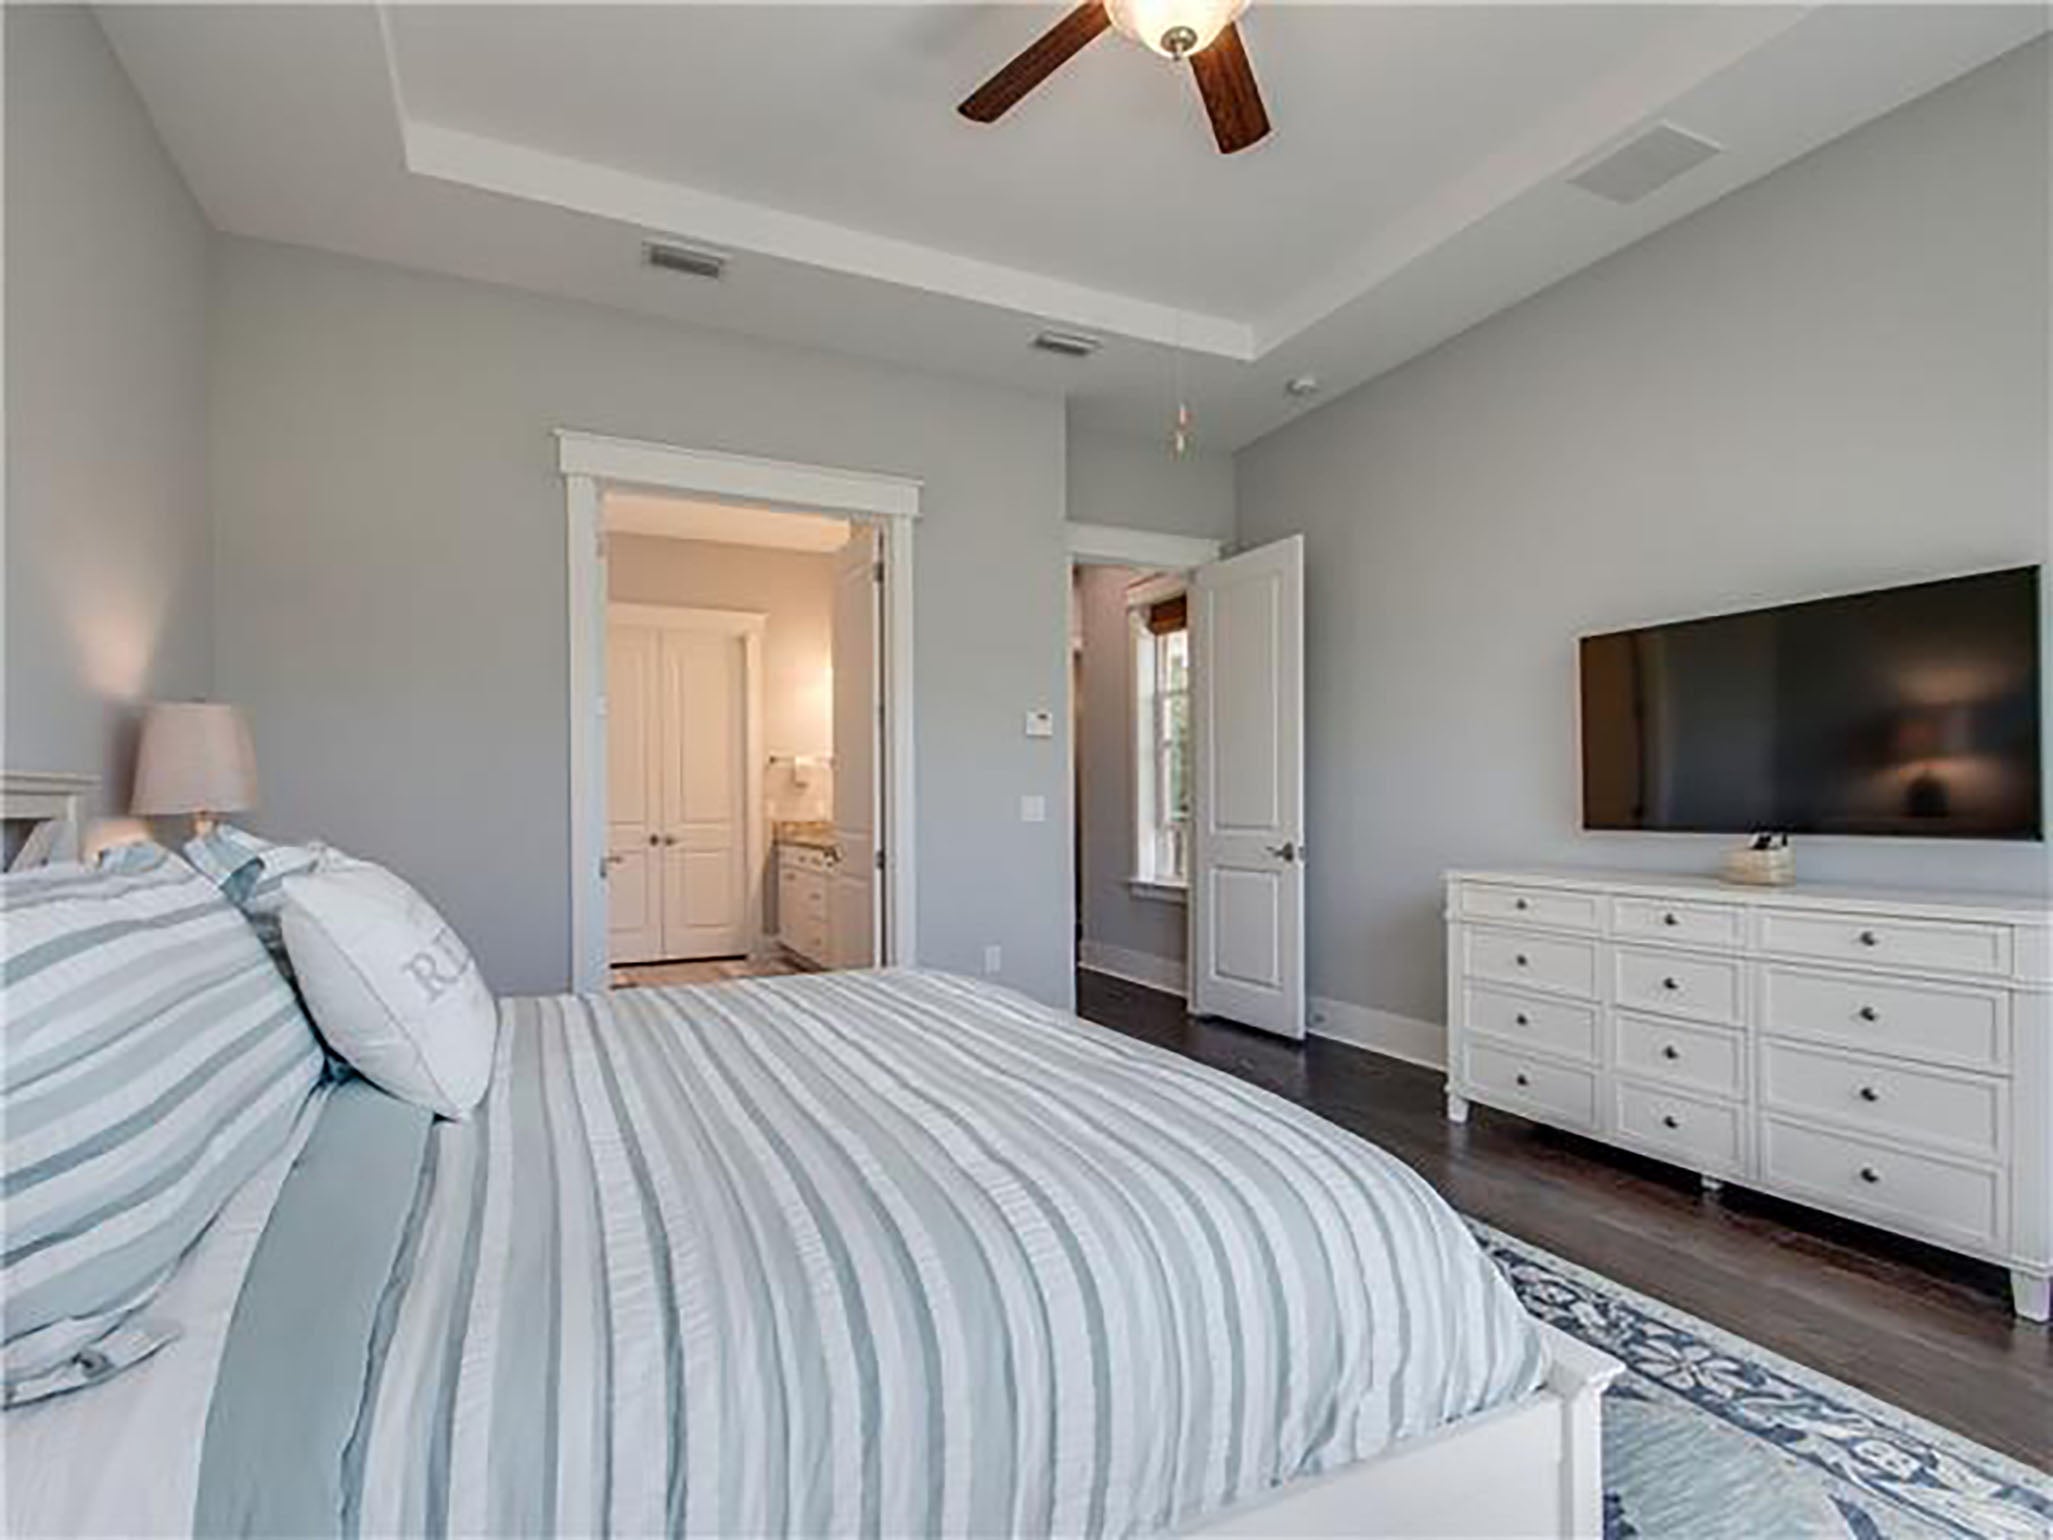 Pottery Barn furniture, comfortable King mattress, and 55” smart TV makes this your own special retreat.